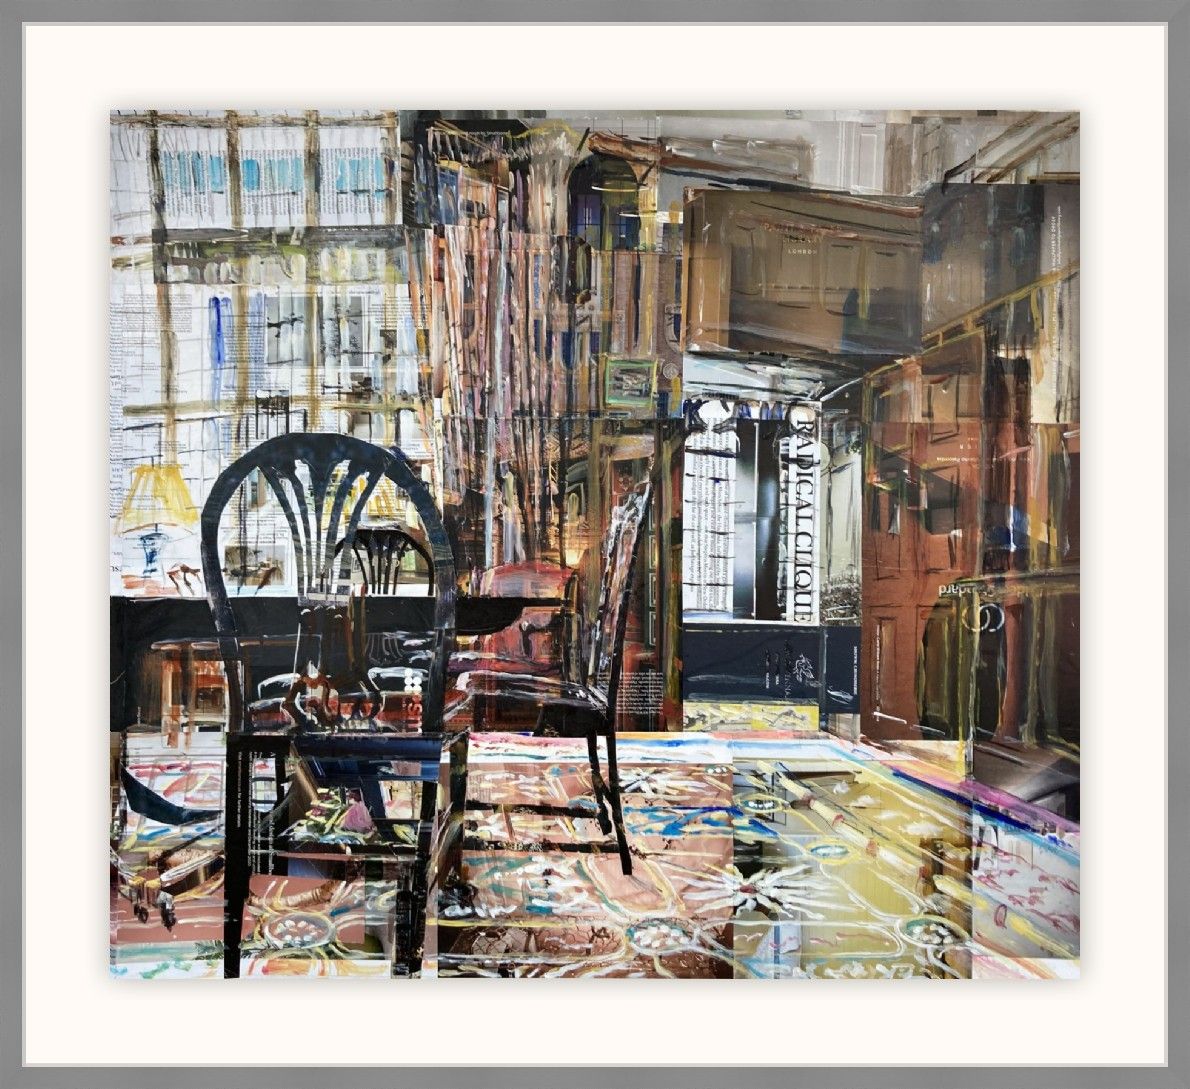 Merchant Taylor's Hall, Library (radical clique) by Alison Pullen